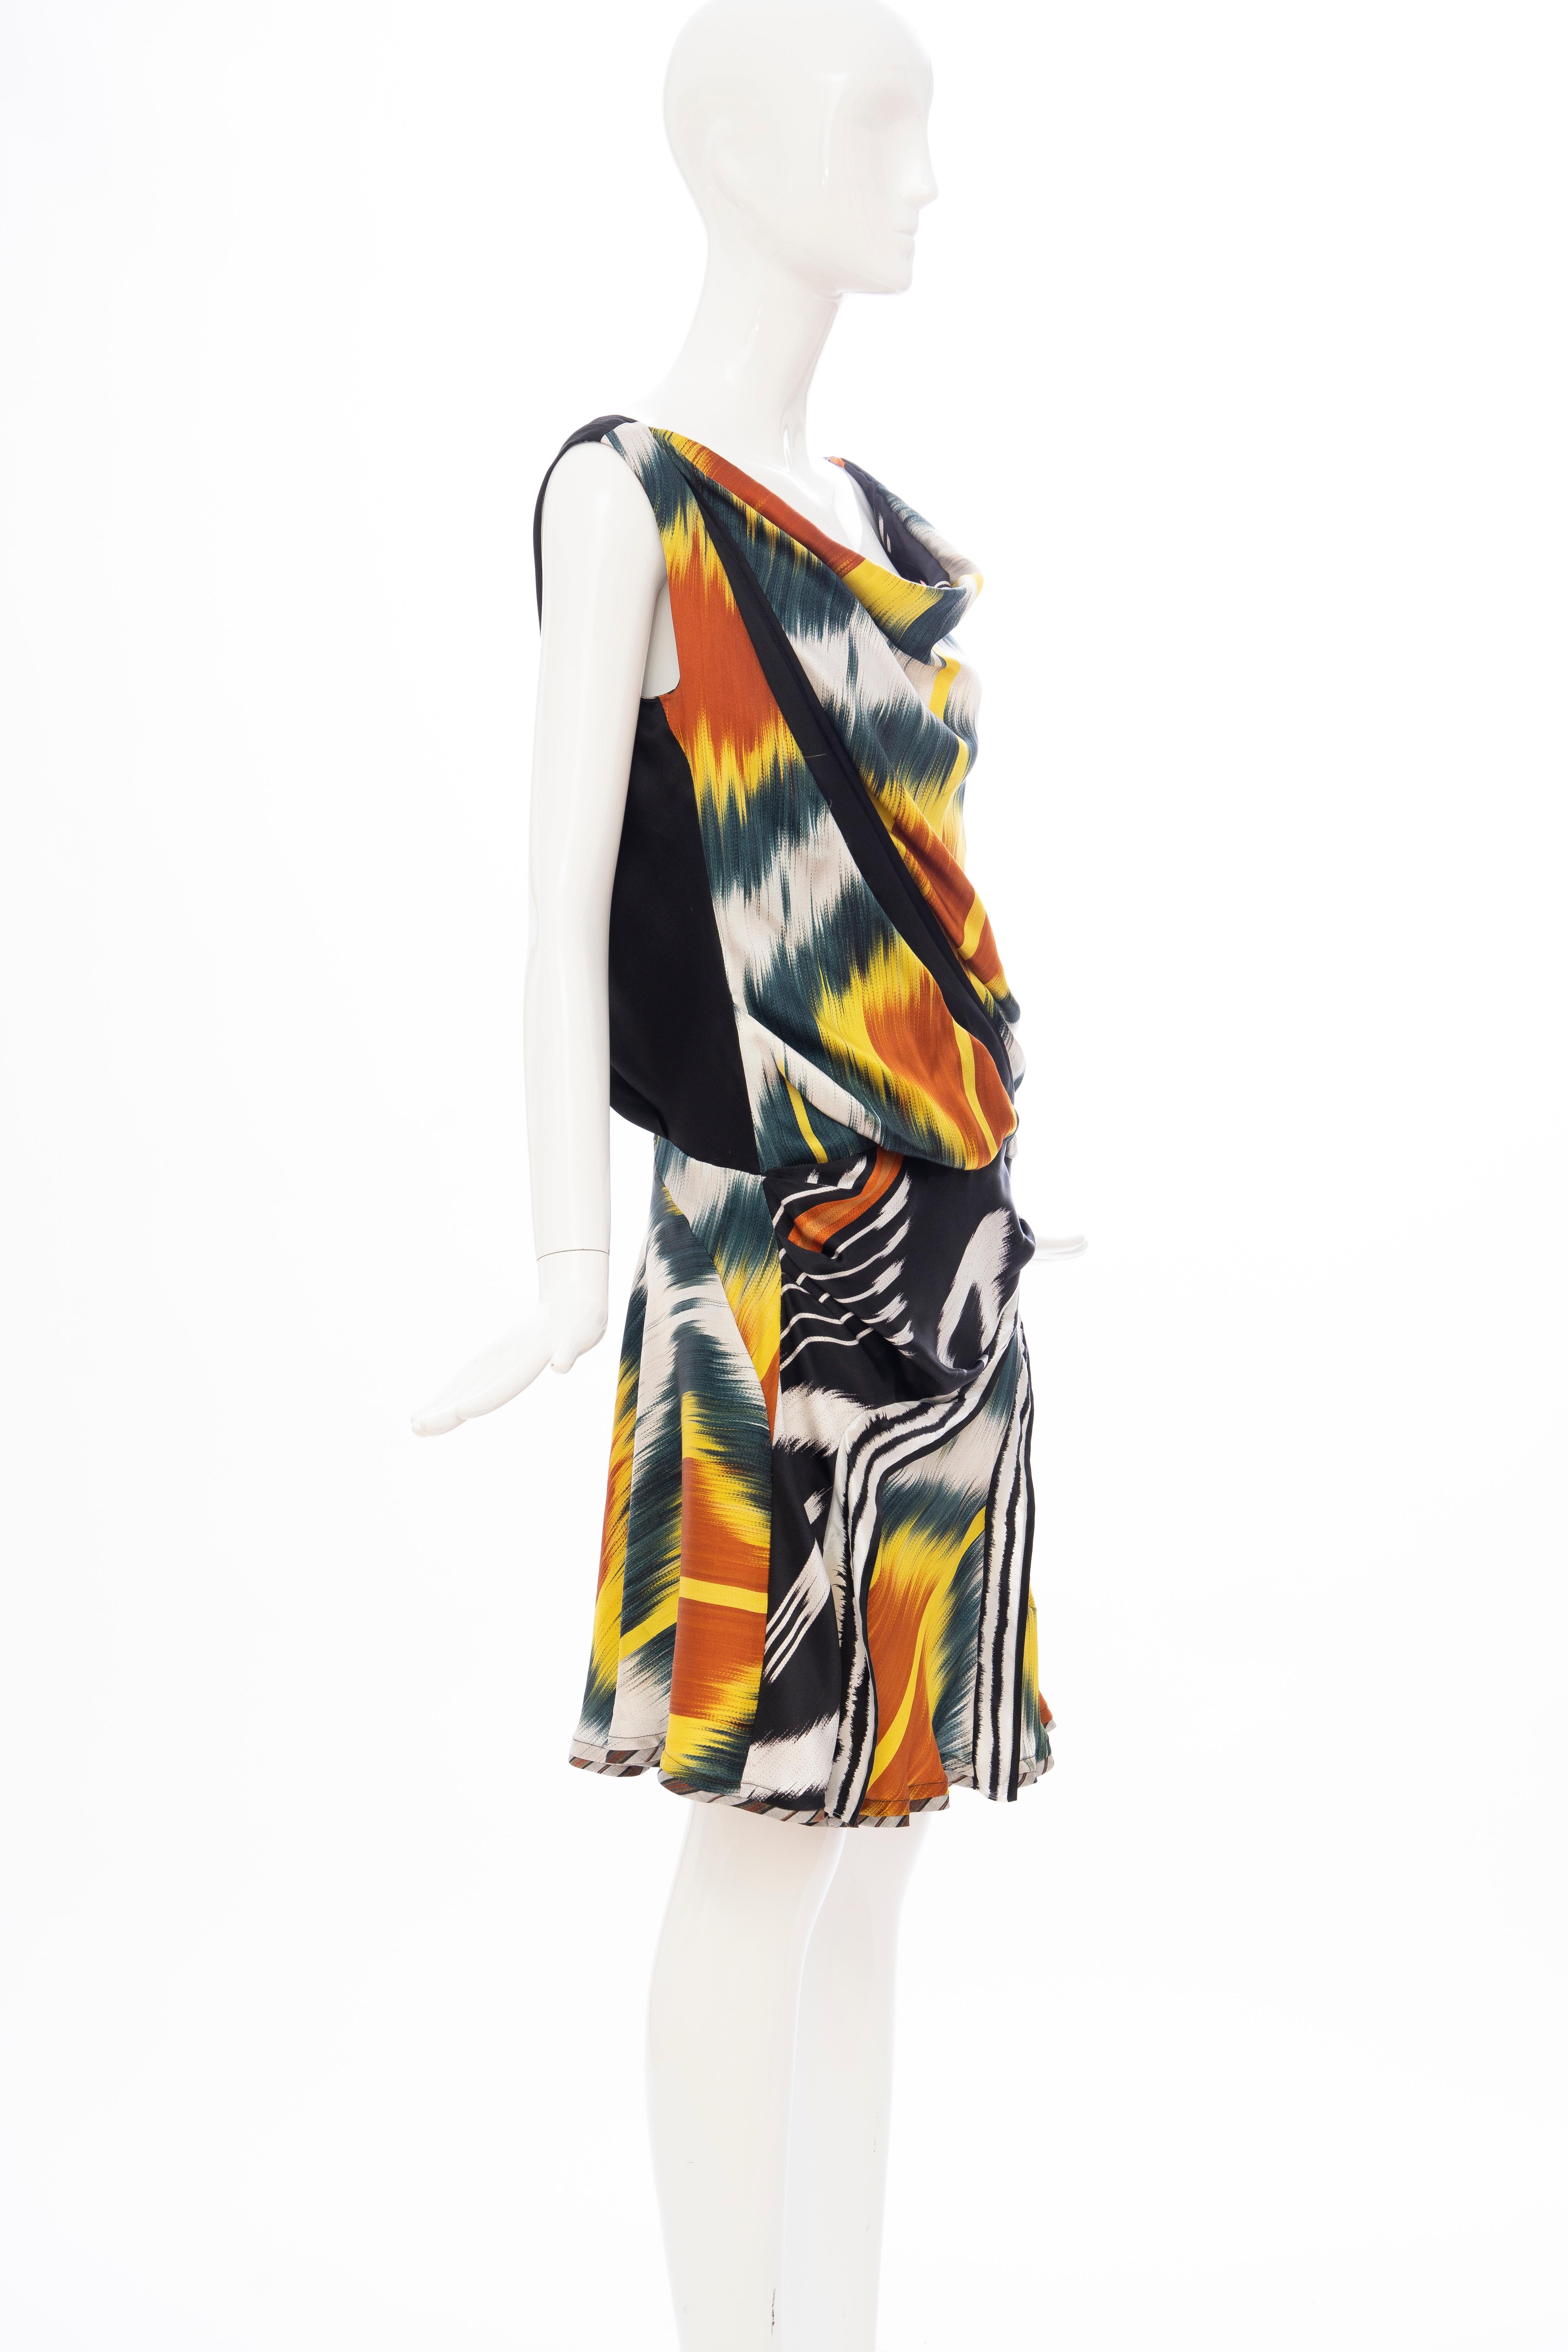 Nicolas Ghesquière for Balenciaga Runway Silk Sleeveless Ikat Dress, Fall 2007 In Excellent Condition For Sale In Cincinnati, OH